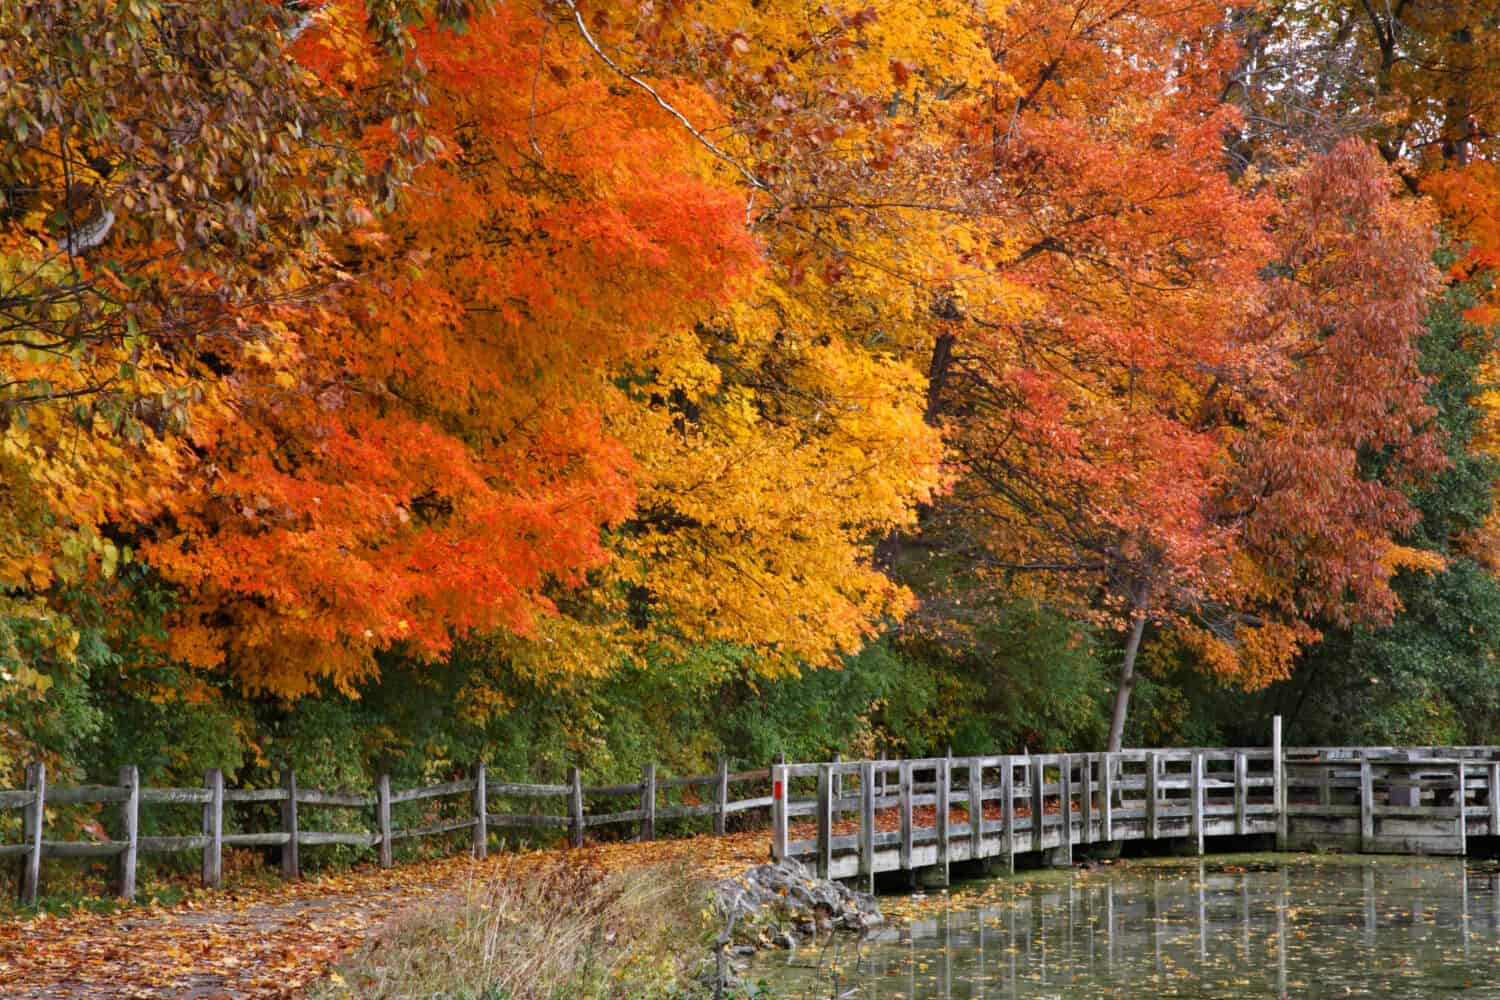 Trees Positively Ablaze With Color During Autumn In The Park, Walking Path, Fence And Pond, Sharon Woods, Southwestern Ohio